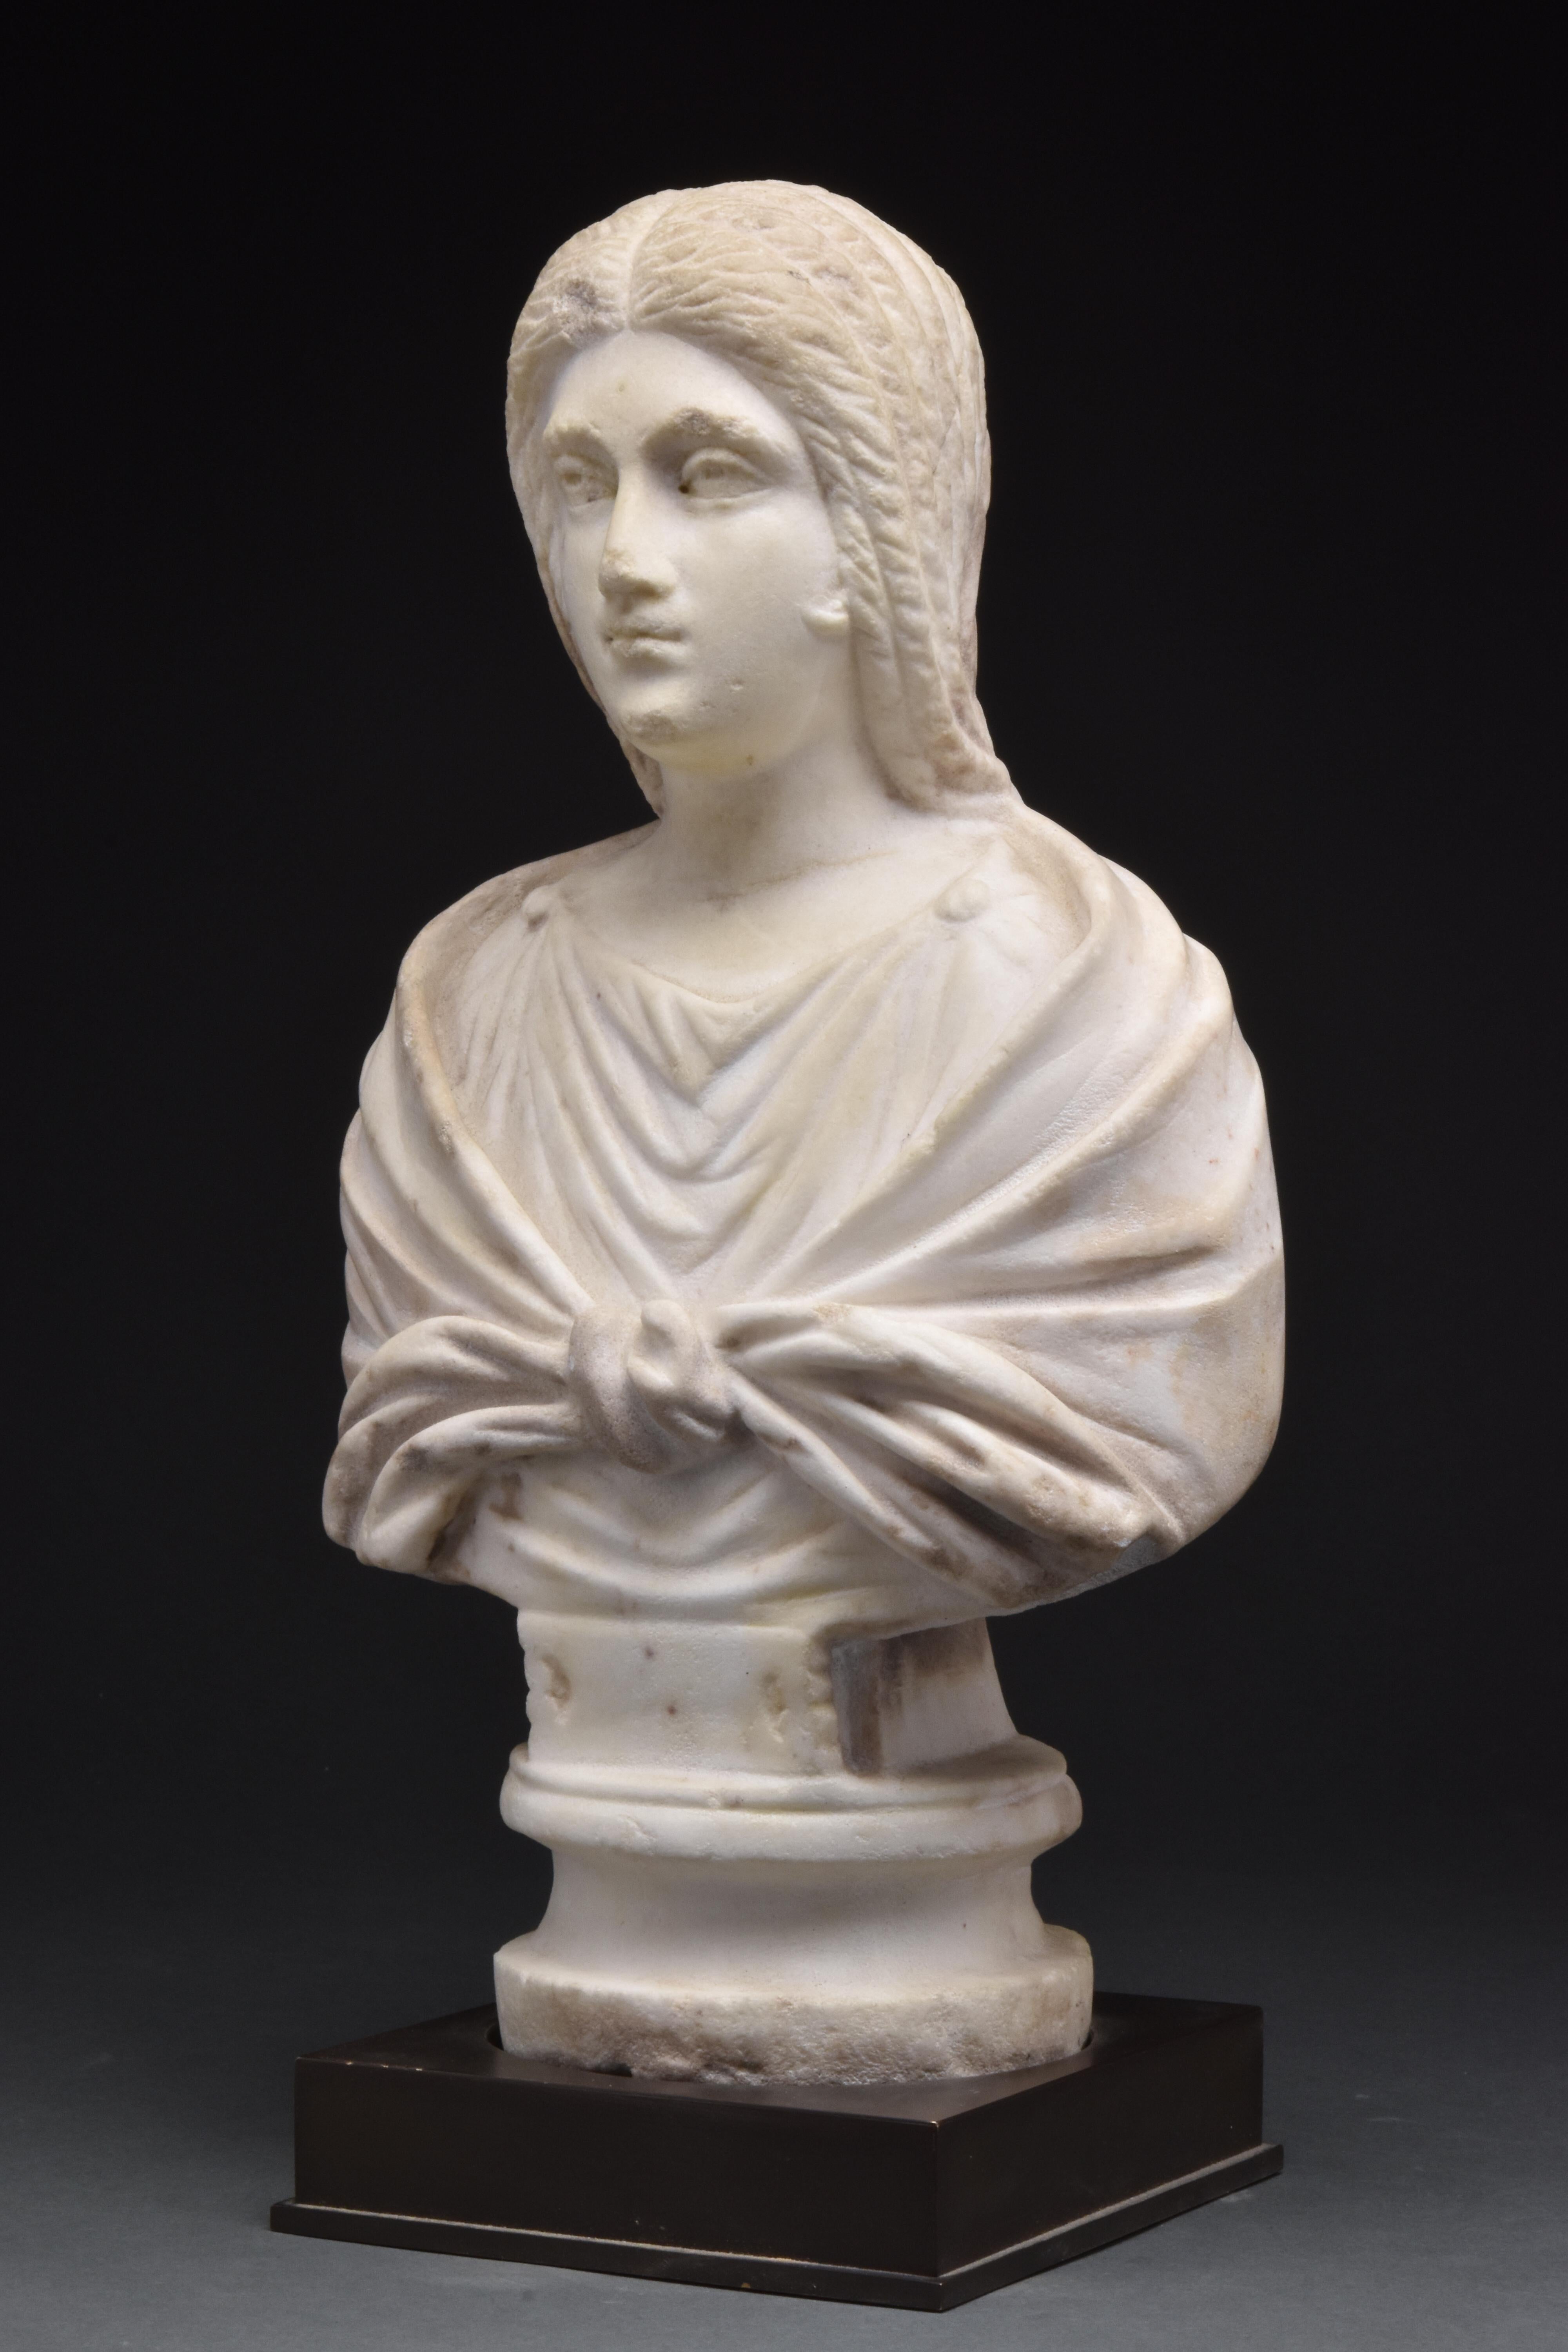 Late 2nd Century AD
A beautifully carved Roman bust of a woman with her hair elegantly parted at the centre as was fashionable during the late Antonine and Severan periods. Her face depicts a serene expression, with large eyes drilled to have deep